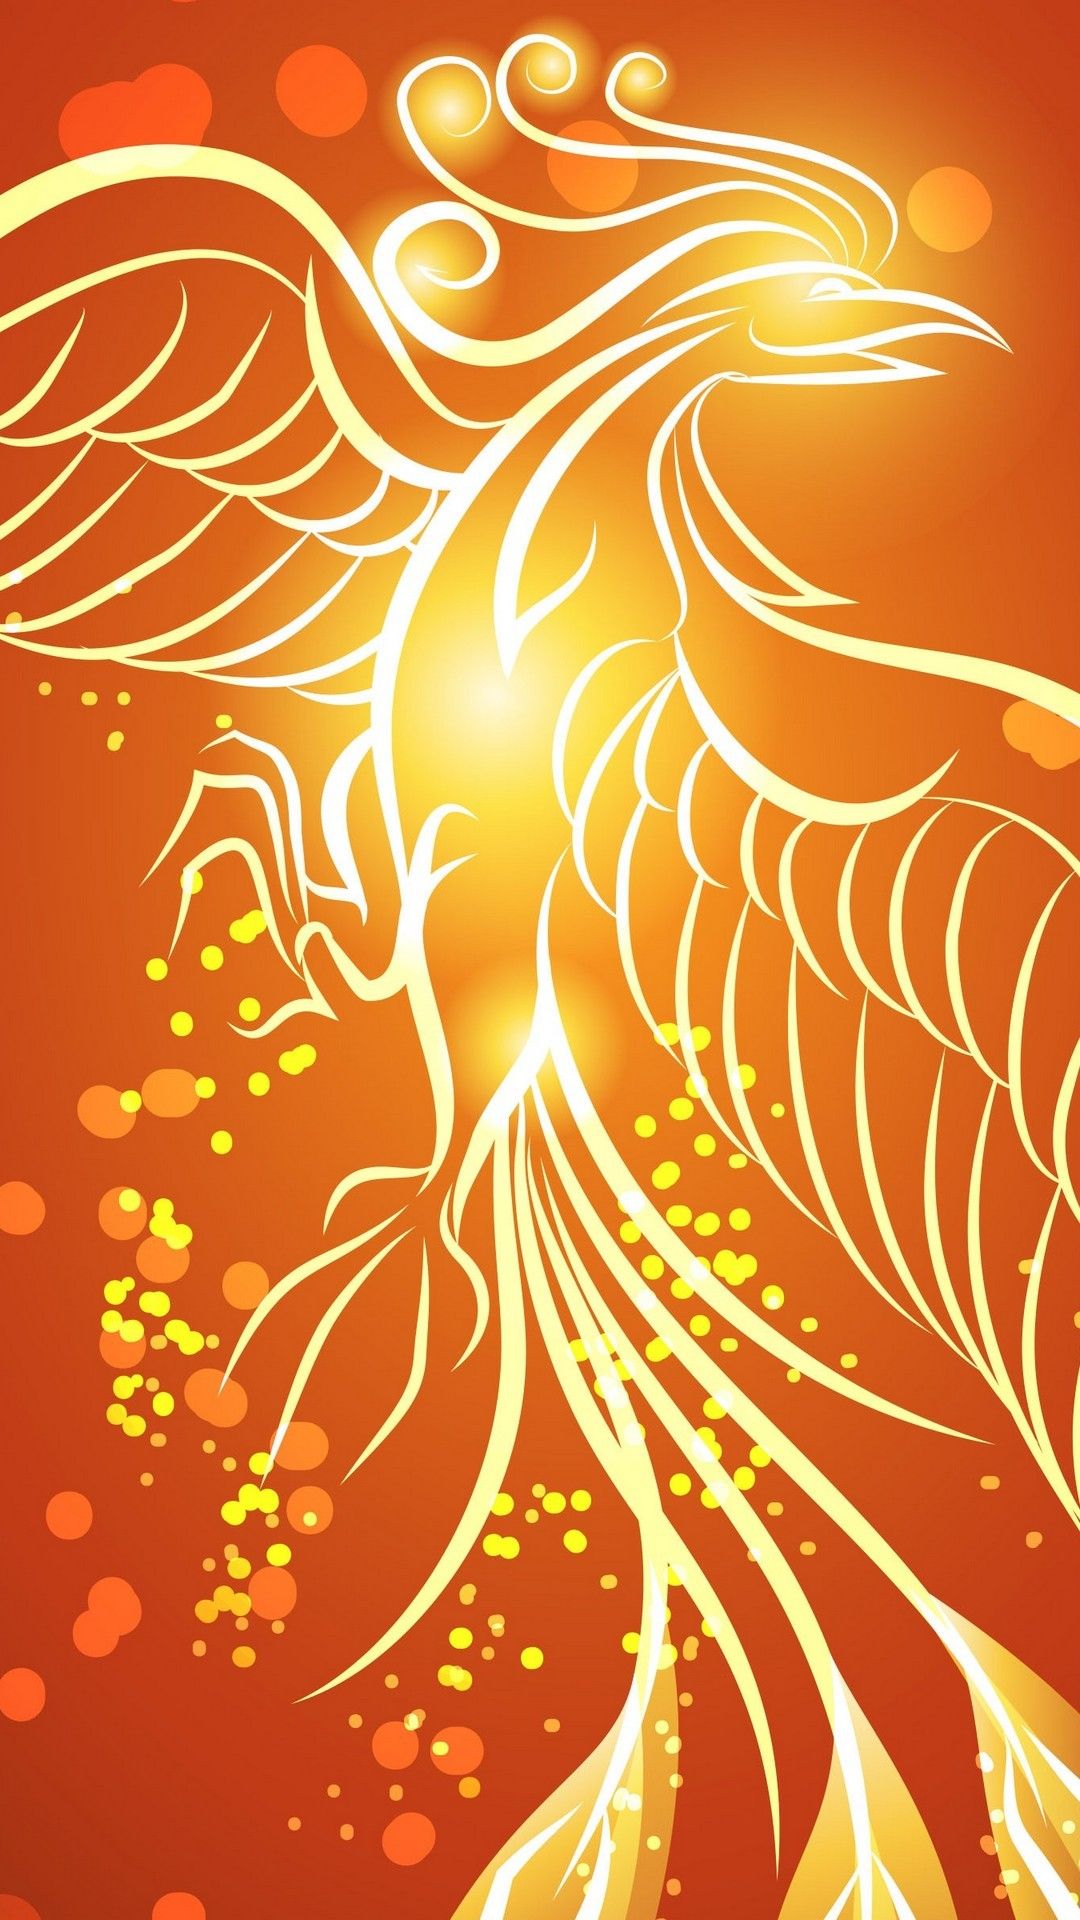 Phoenix Image HD Wallpaper For Android Android Wallpaper